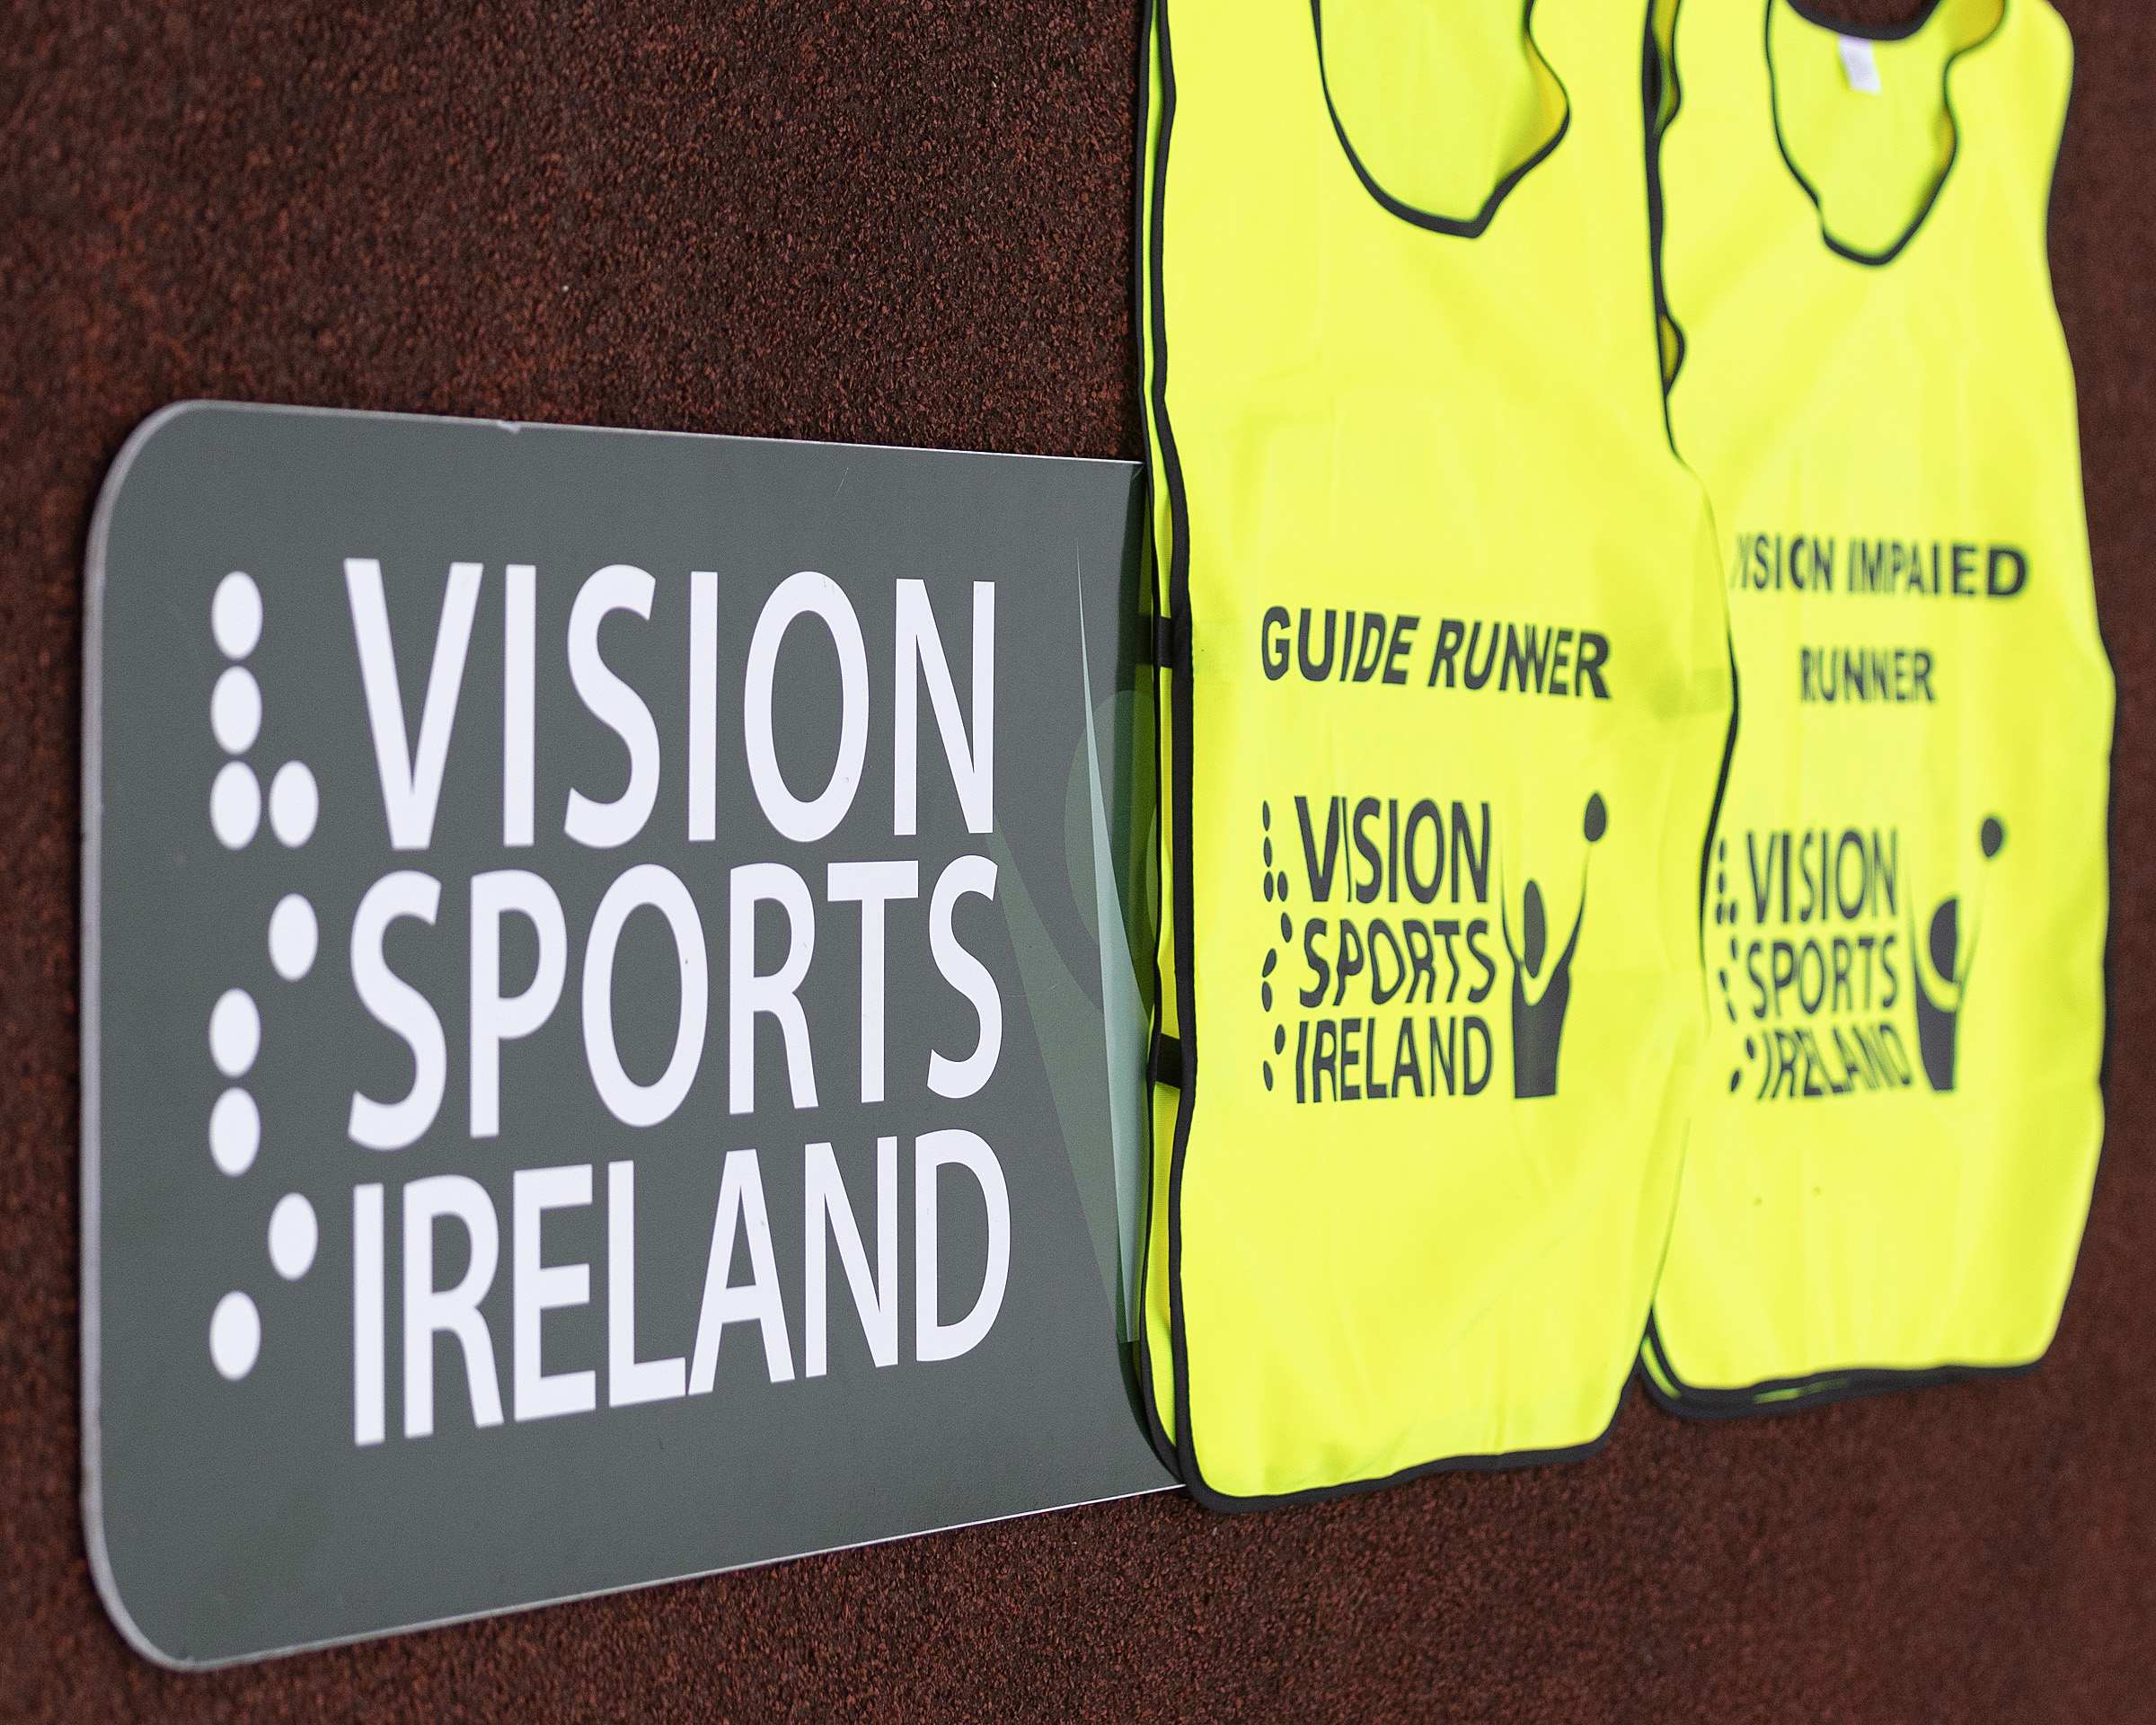 A vision Sports Ireland sign on the ground with a guide runner and vision impaired runner yellow bib on top of it.